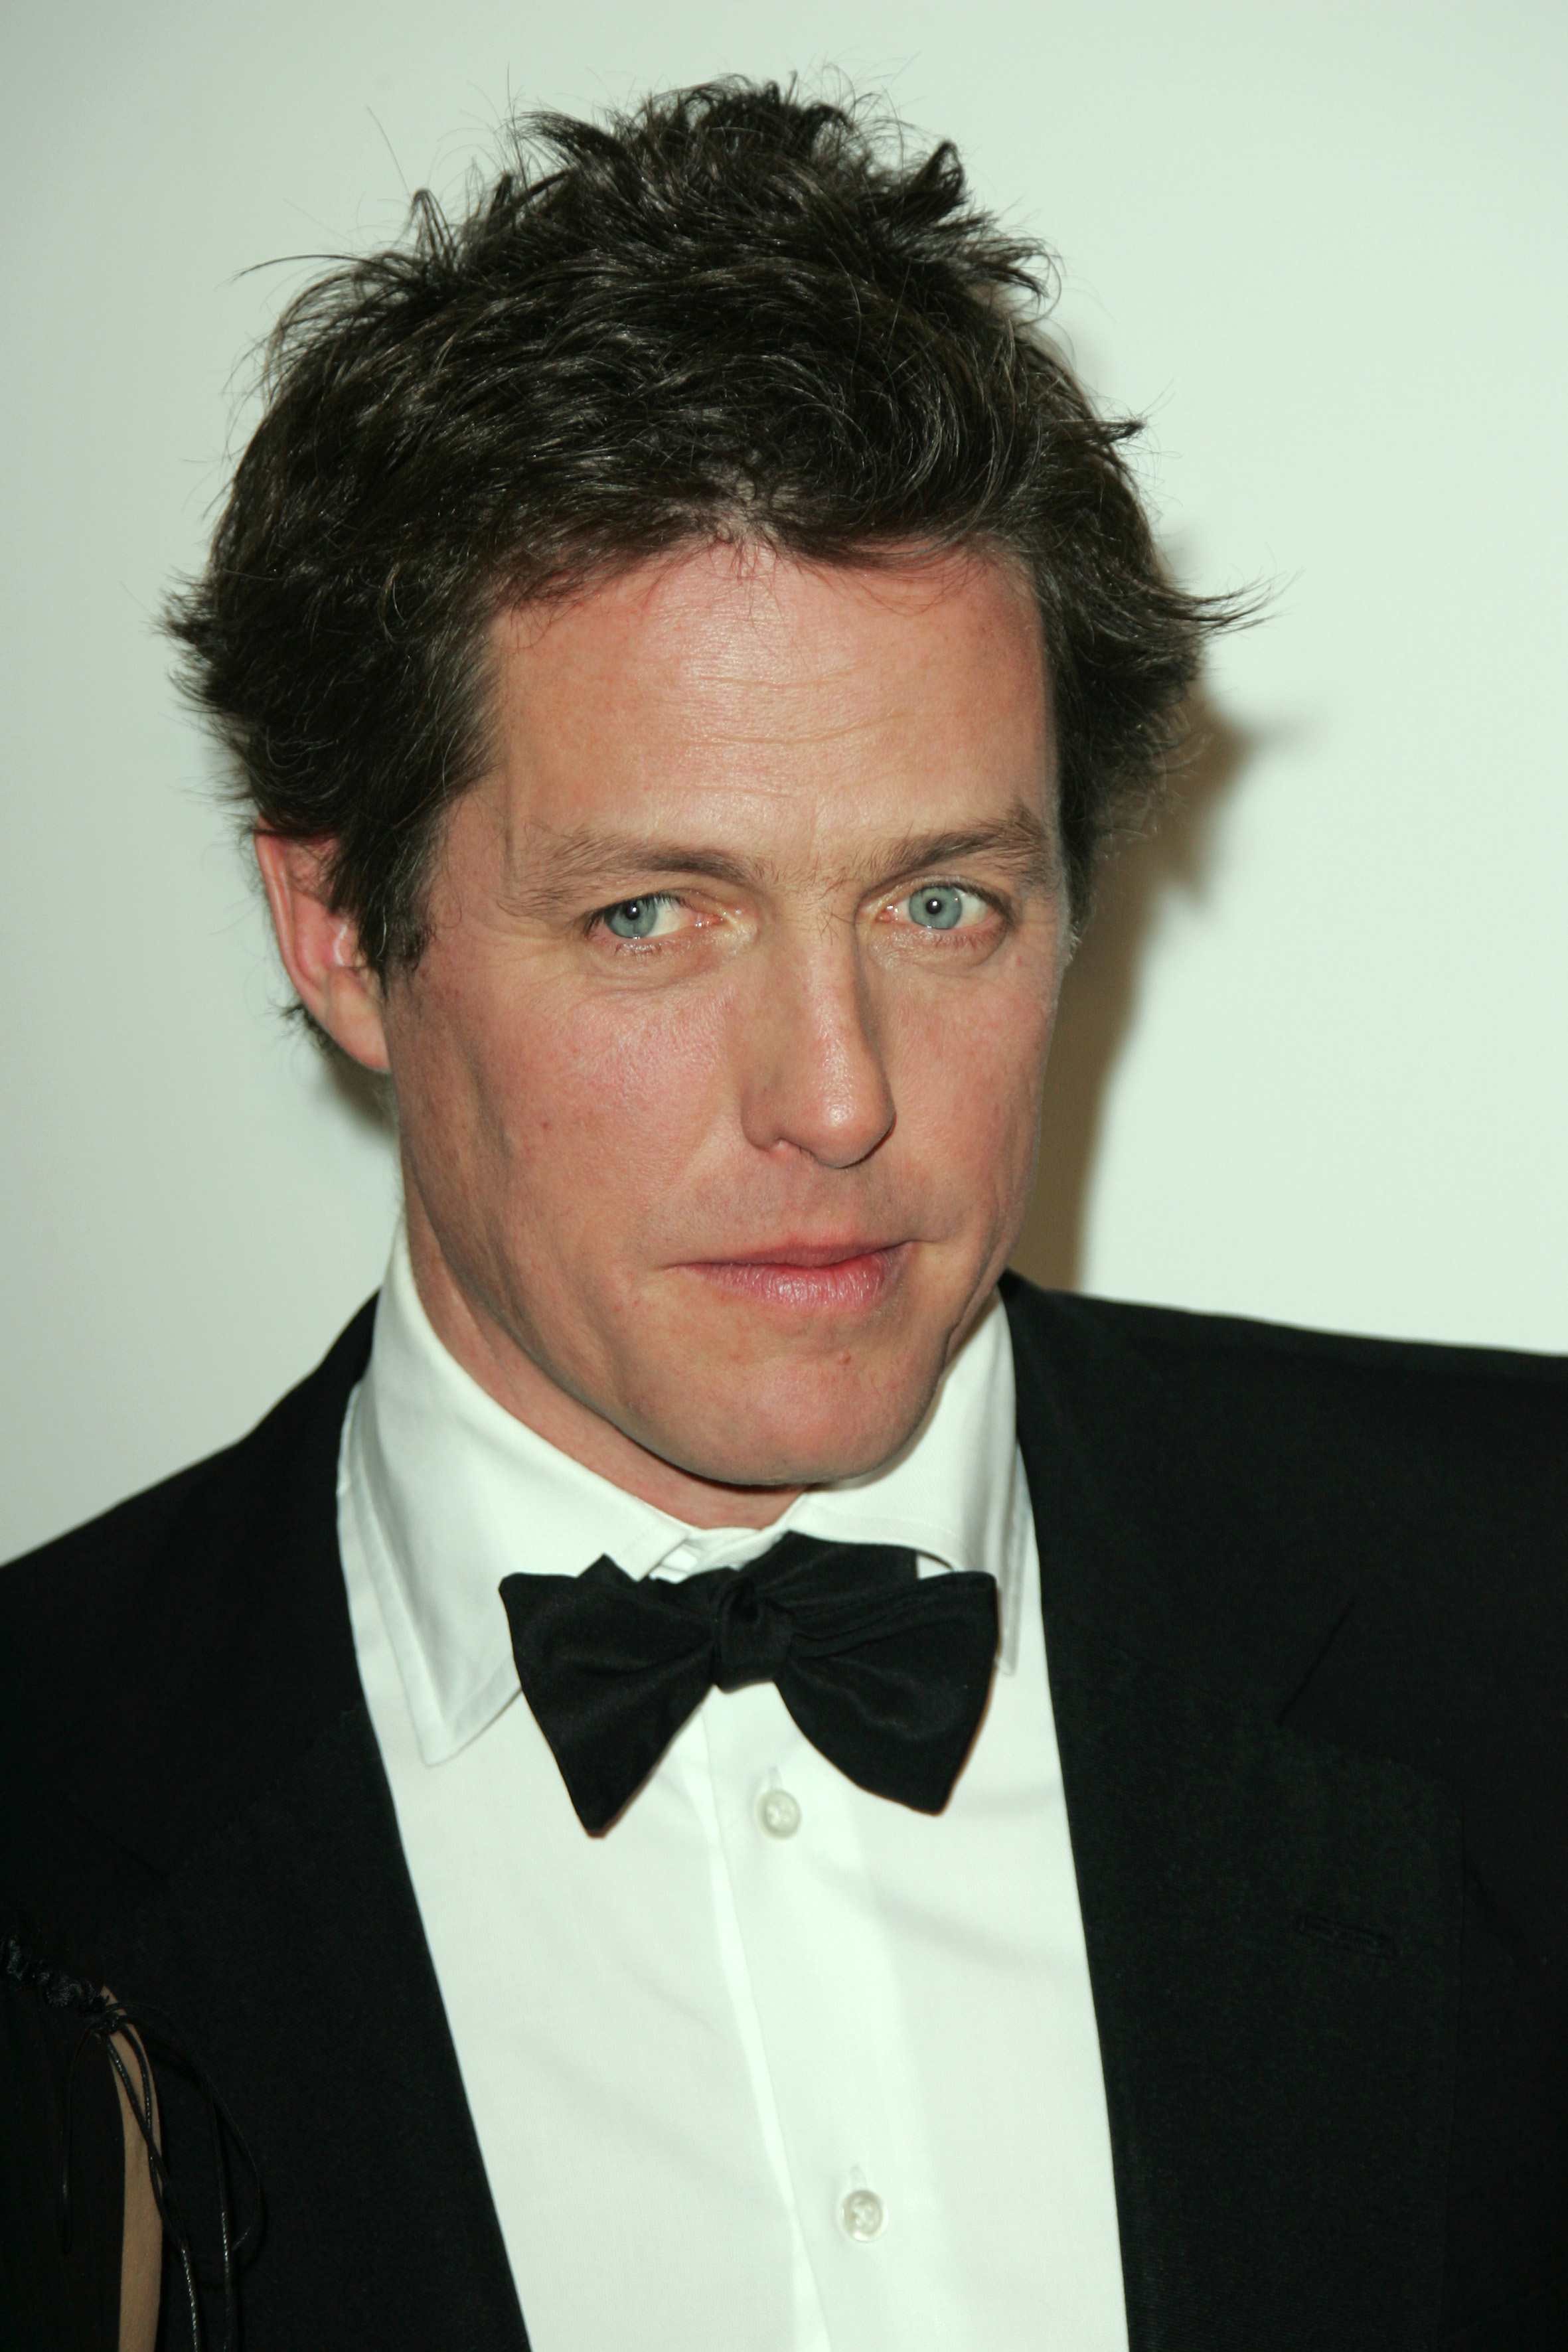 Hugh Grant in a classic tuxedo with a bow tie at a formal event